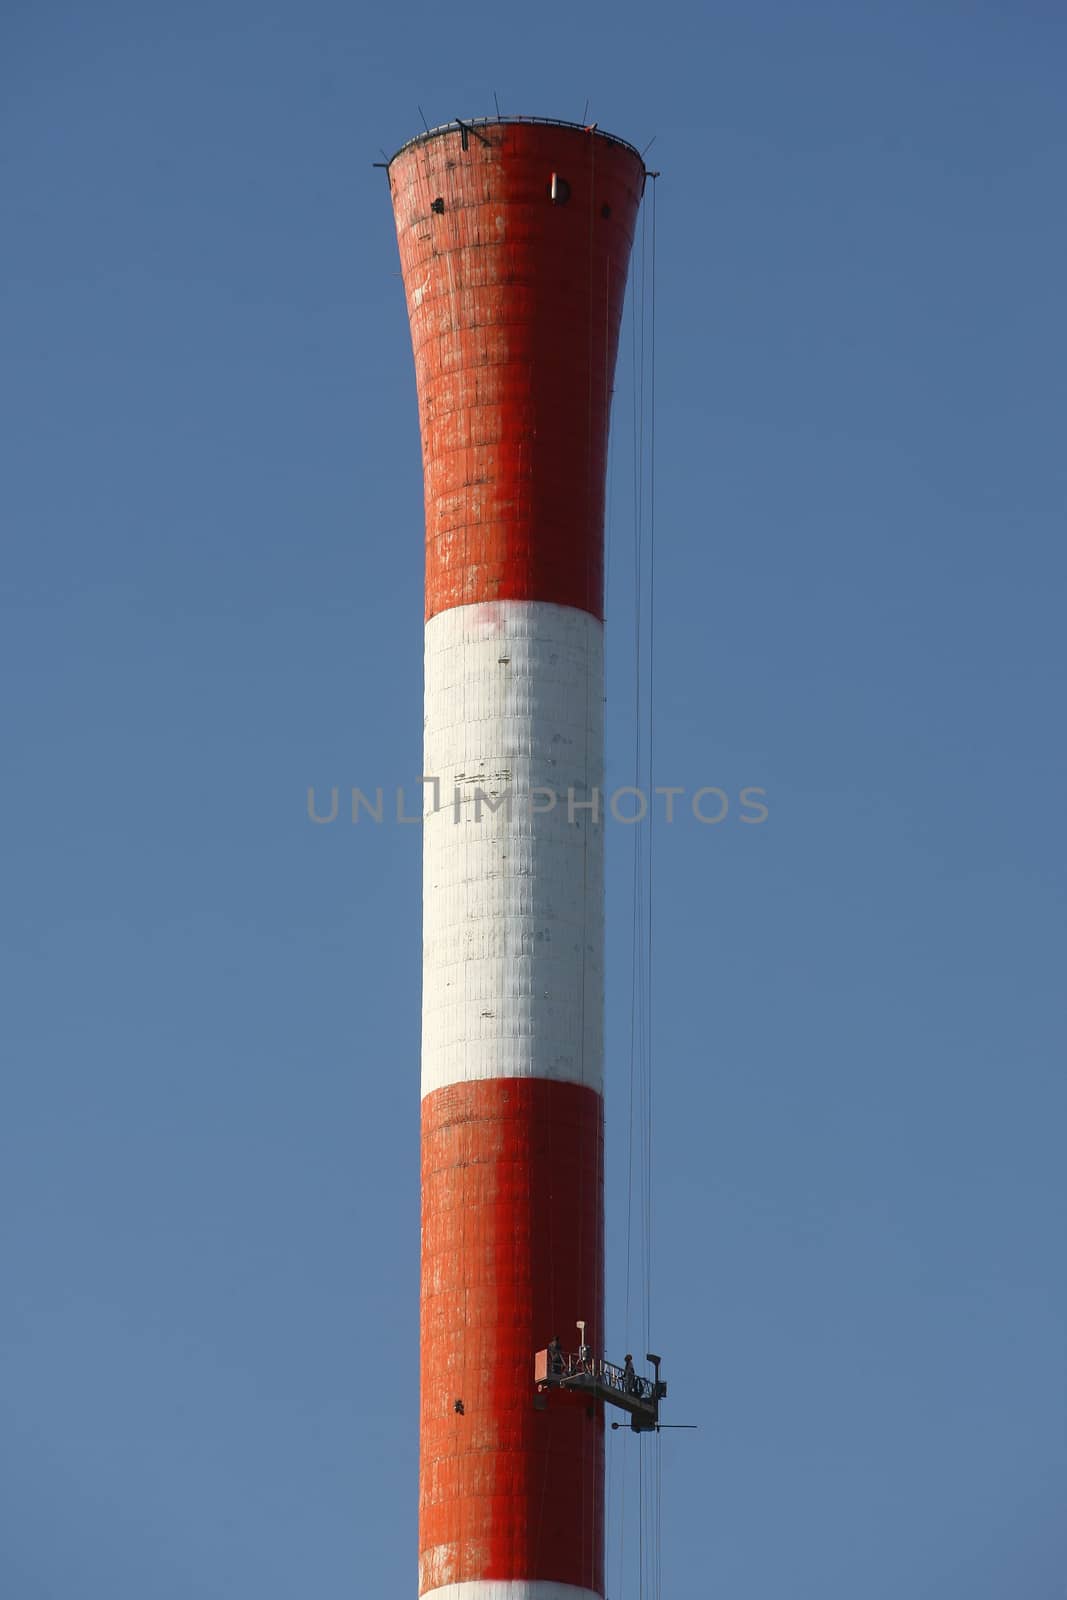 Heat and power central, smoke pipe against clear blue sky